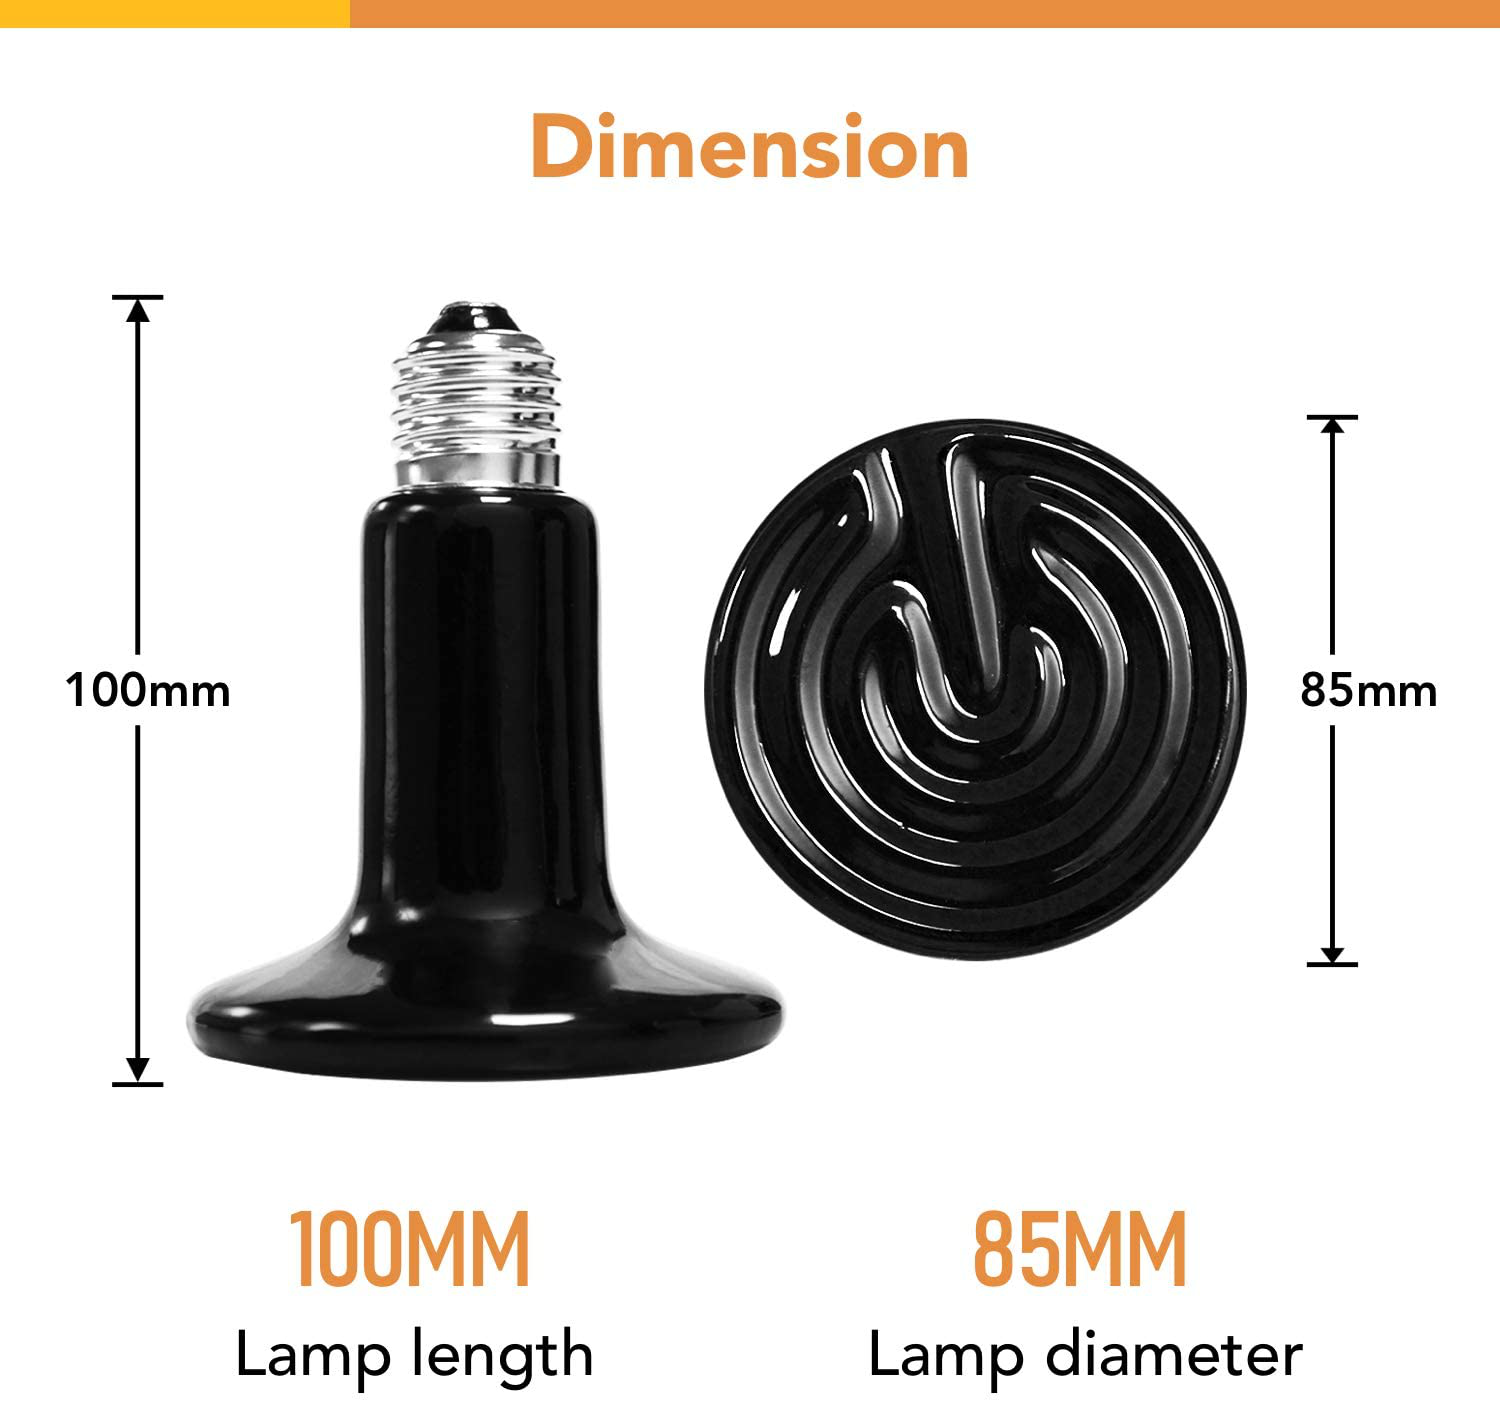 Simple Deluxe 150W Ceramic Heat Emitter Reptile Heat Lamp Bulb No Light Emitting Brooder Coop Heater for Amphibian Pet & Incubating Chicken, 1 Pack/ 2 Pack with Thermometer, Black & White Animals & Pet Supplies > Pet Supplies > Reptile & Amphibian Supplies > Reptile & Amphibian Habitat Heating & Lighting Simple Deluxe   